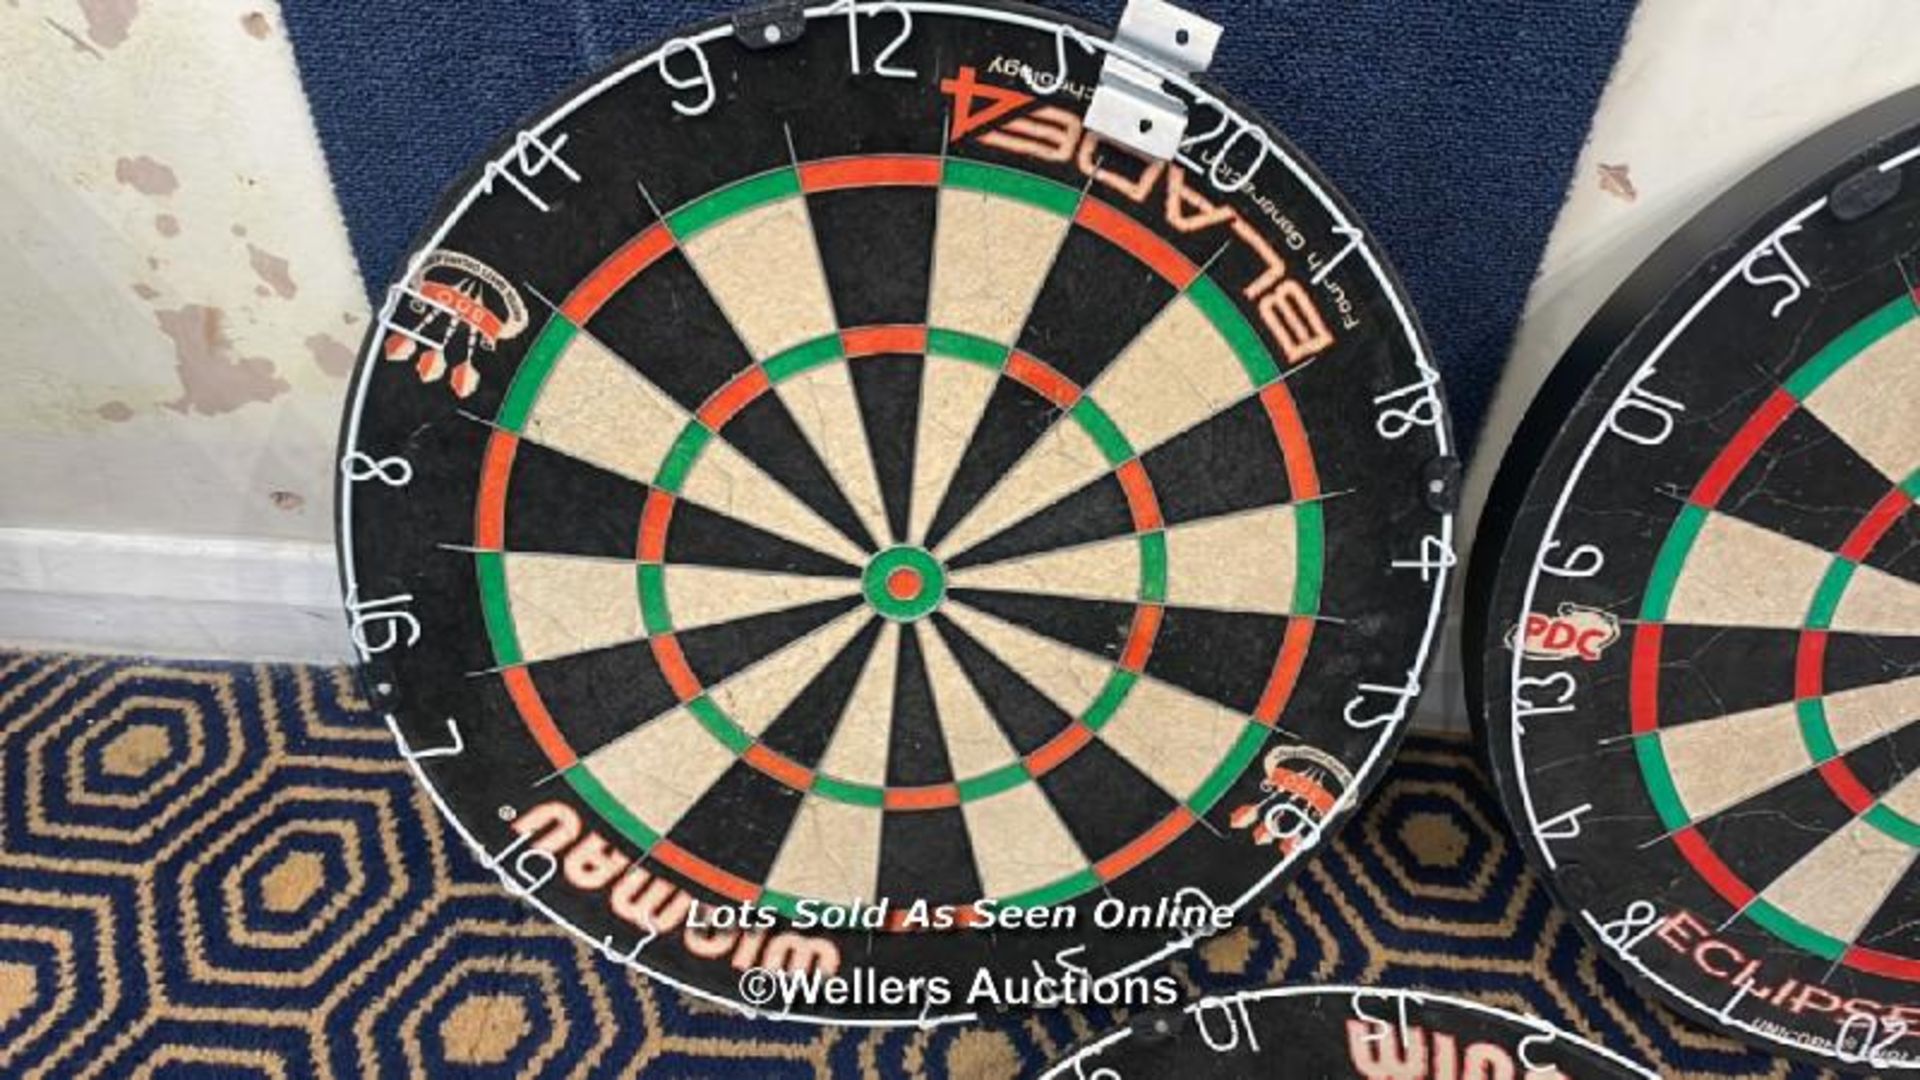 3X DARTBOARDS INCLUDING WINMAU BLADE 4/5 AND UNICORN ECLIPSE PRO, WITHOUT SURROUNDS / COLLECTION - Image 3 of 4